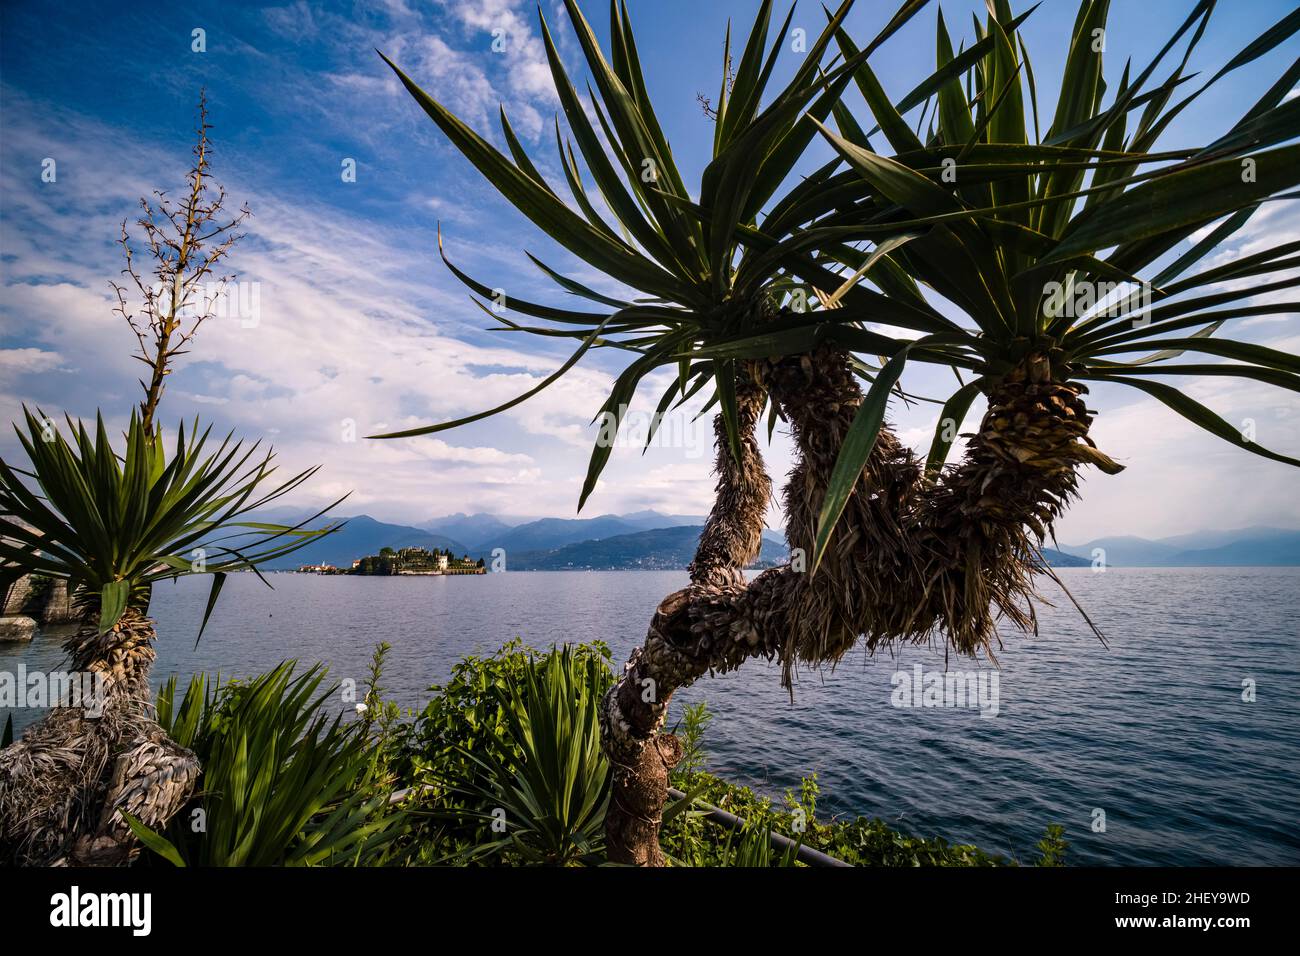 View to the island Isola Bella over Lake Maggiore, palm trees in the foreground, surrounding mountains in the distance. Stock Photo